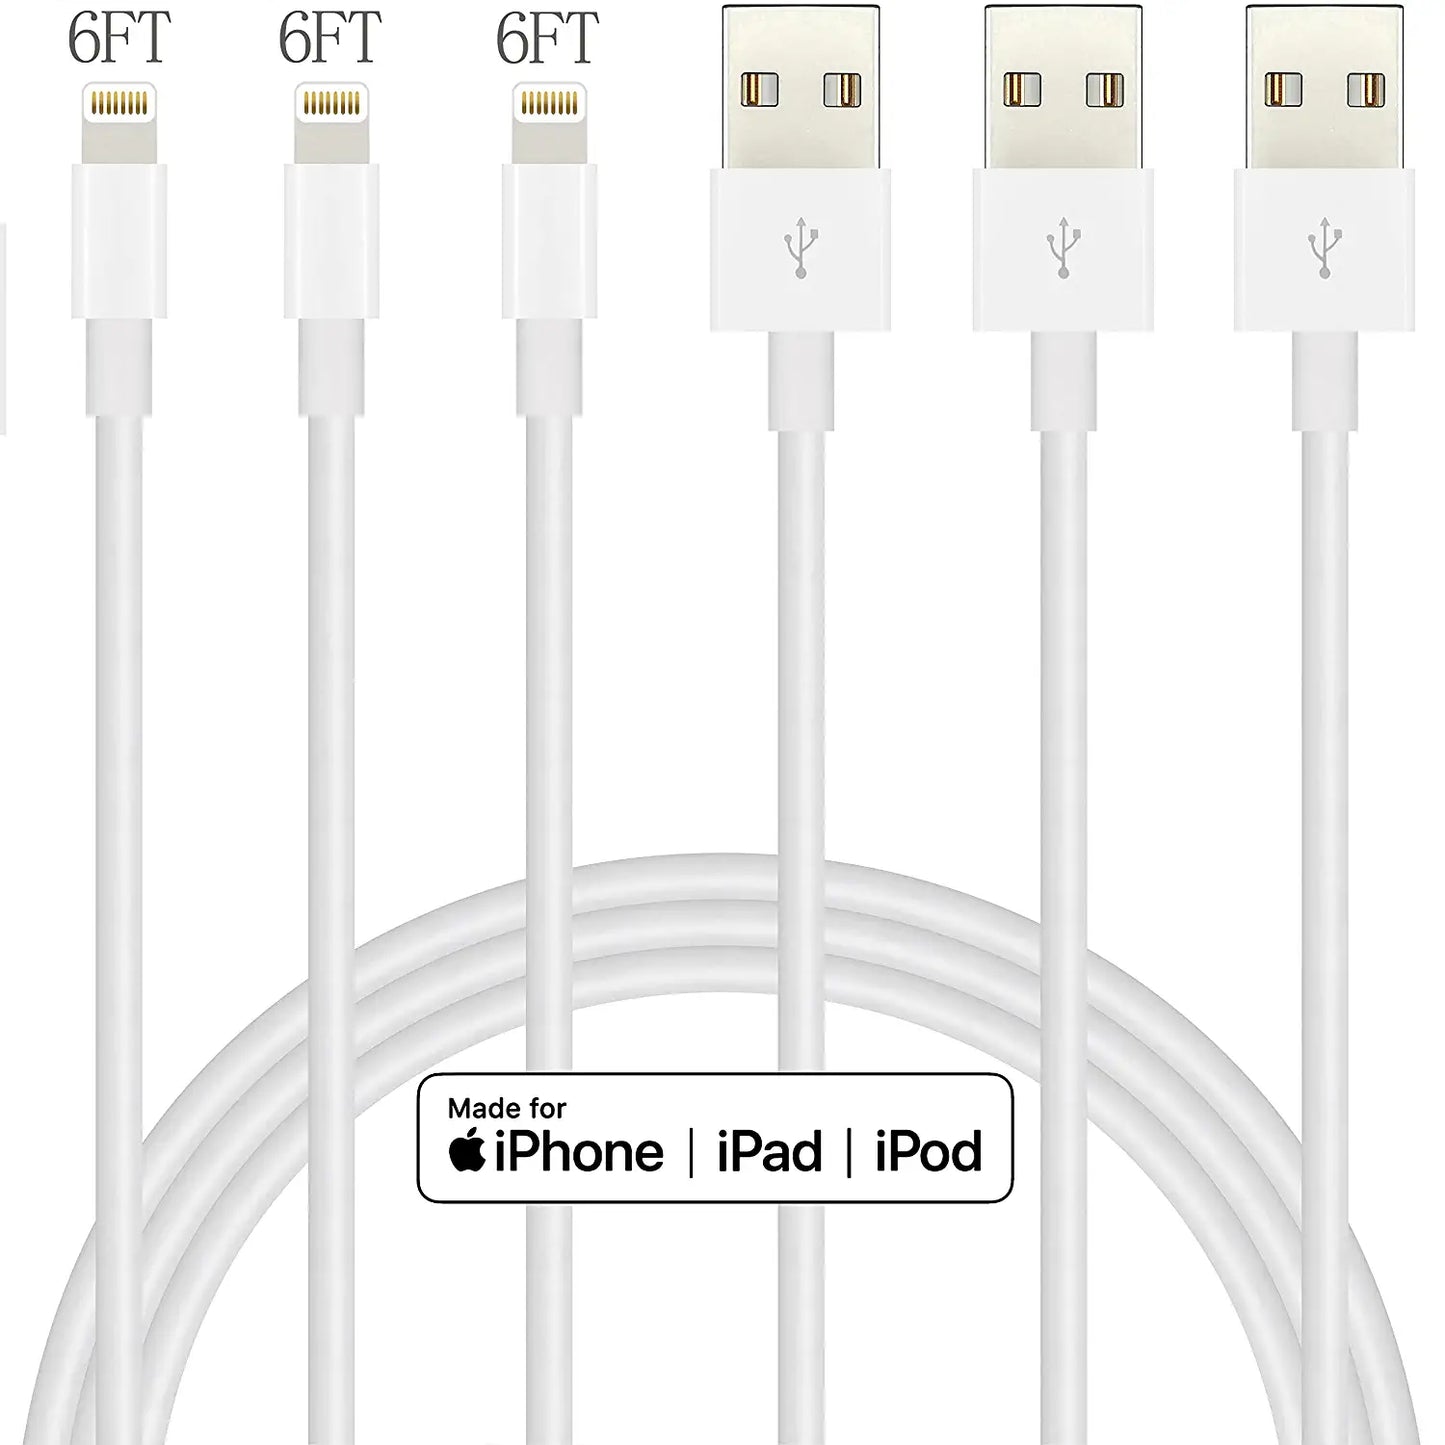 Iphone Charger Lightning Cable 3Pack(6/6/6Ft) Quick Charger Rapid Cord Apple Mfi Certified for Apple Charger, Iphone 13 12 11 Pro X XR XS MAX 8 plus 7 6S 5S 5C Air Ipad Mini Ipod (Grey)